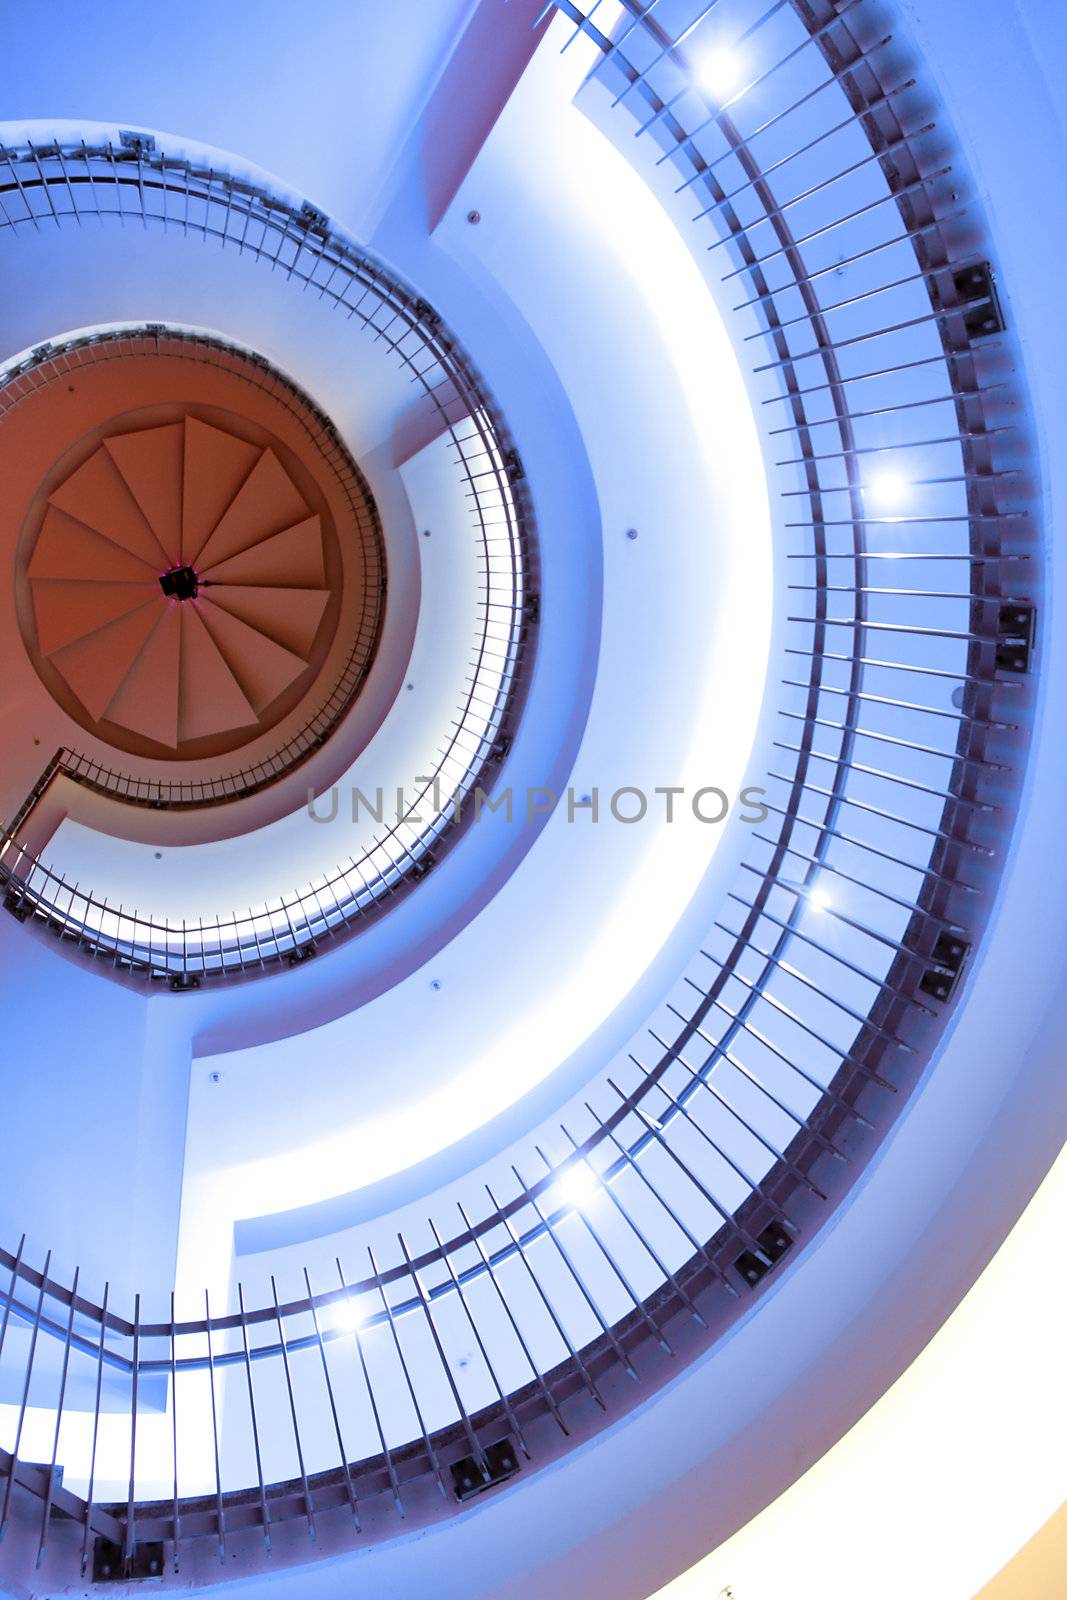 spiral stairs by Hasenonkel